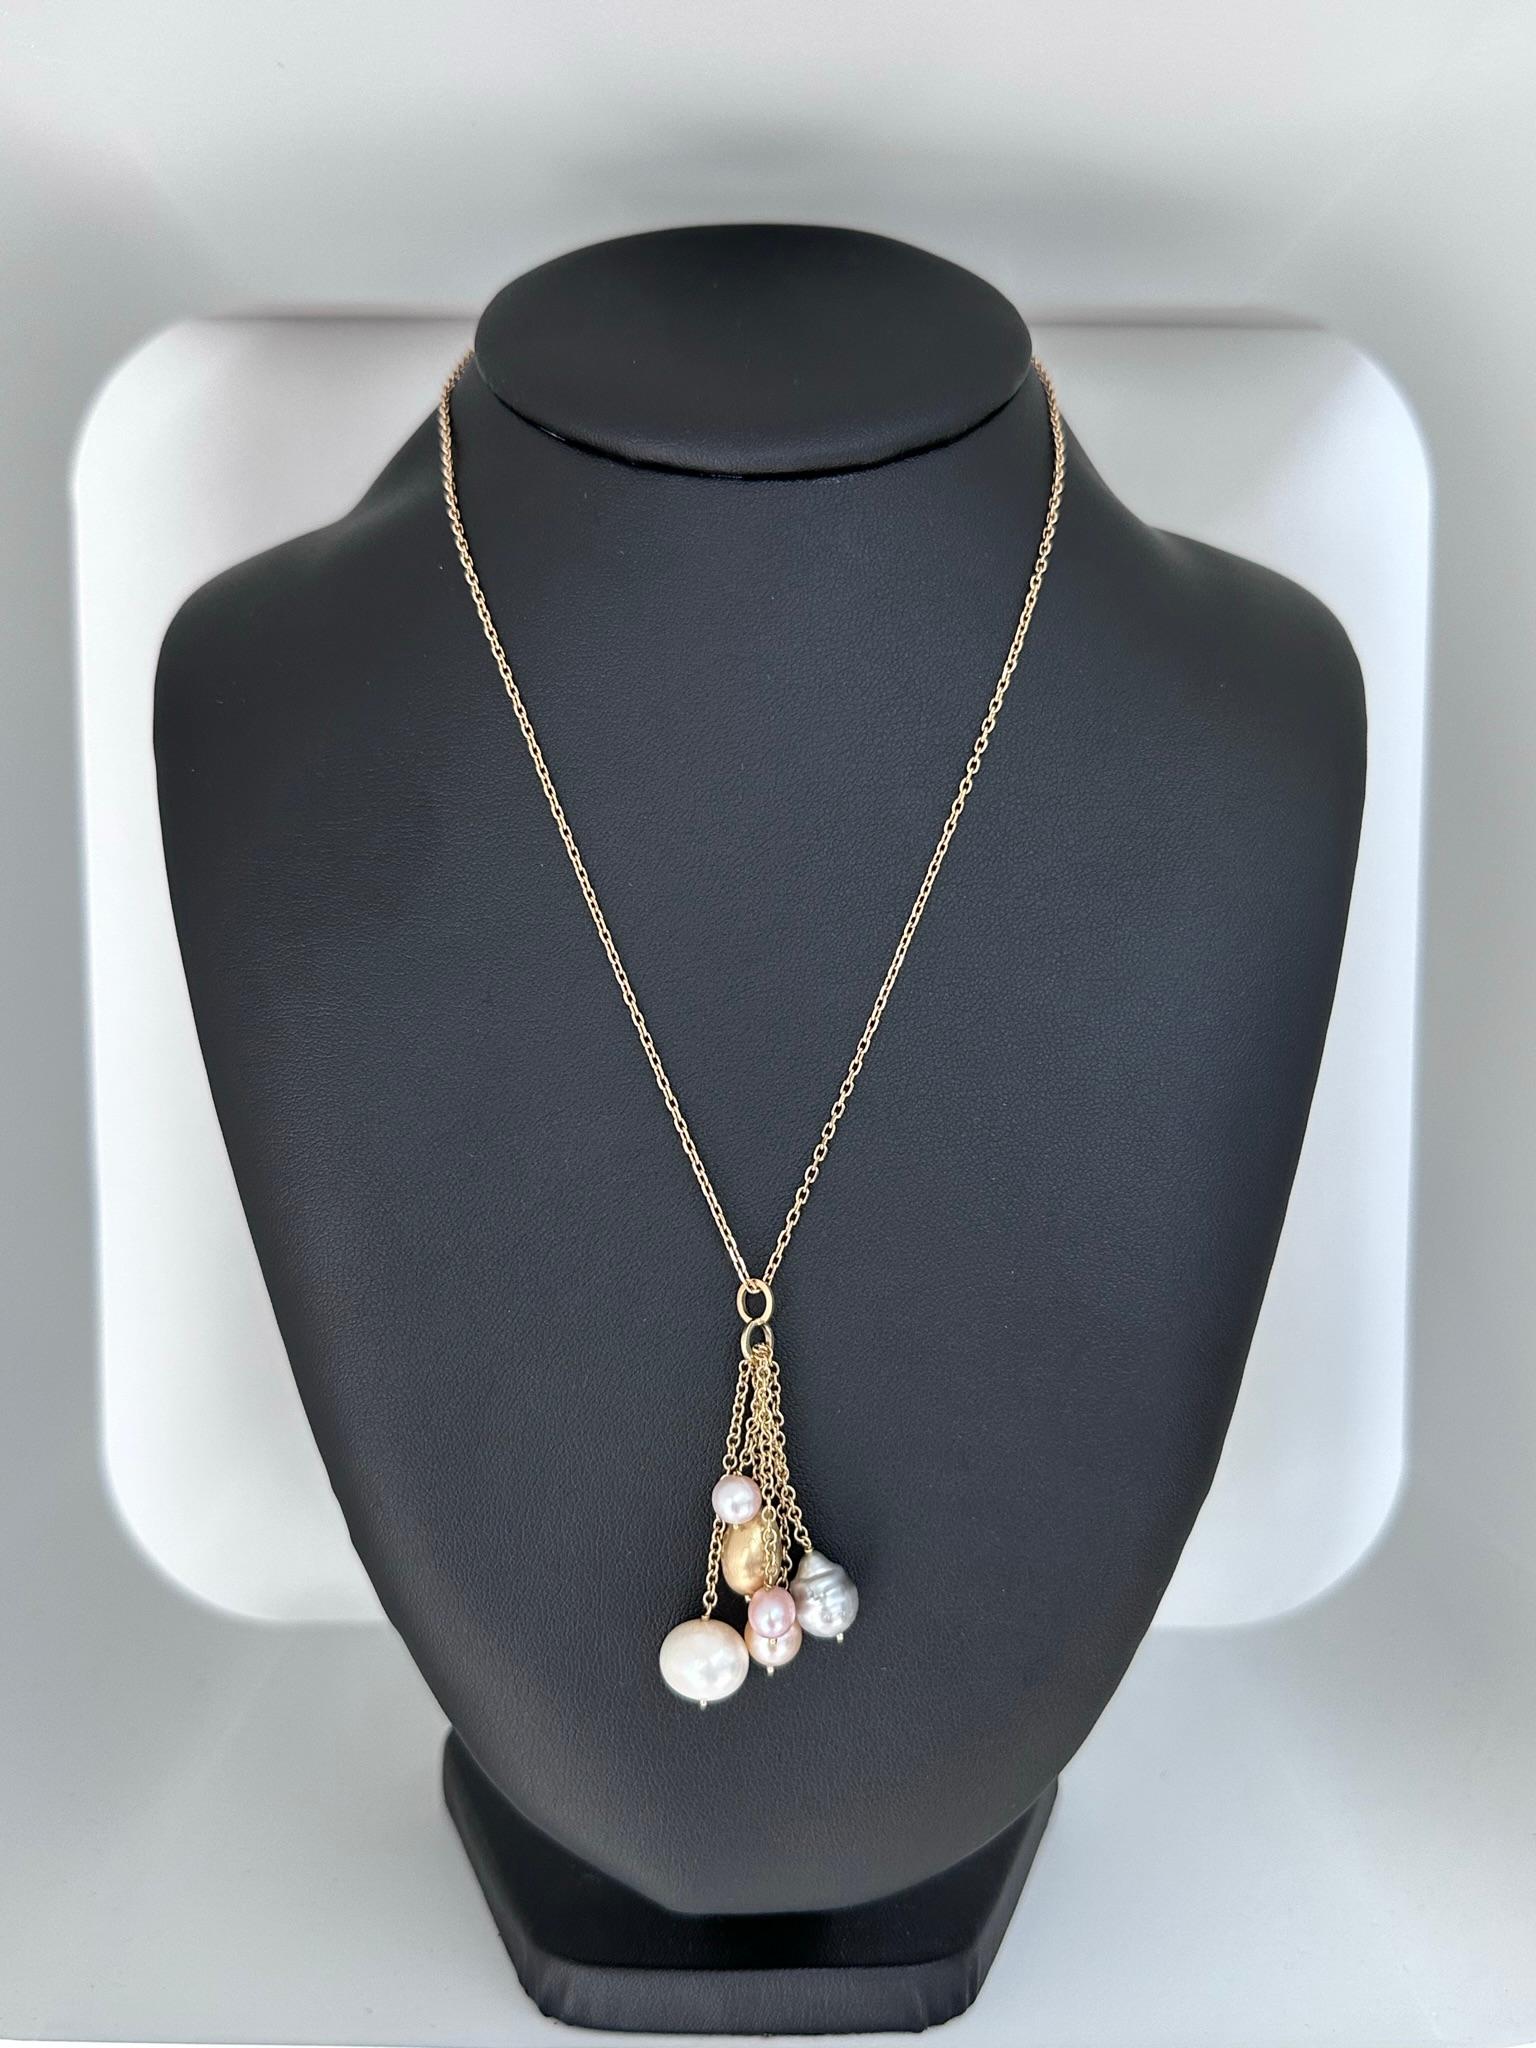 Italian Modern 18kt Yellow Gold Necklace with Pearls In Good Condition For Sale In Esch-Sur-Alzette, LU